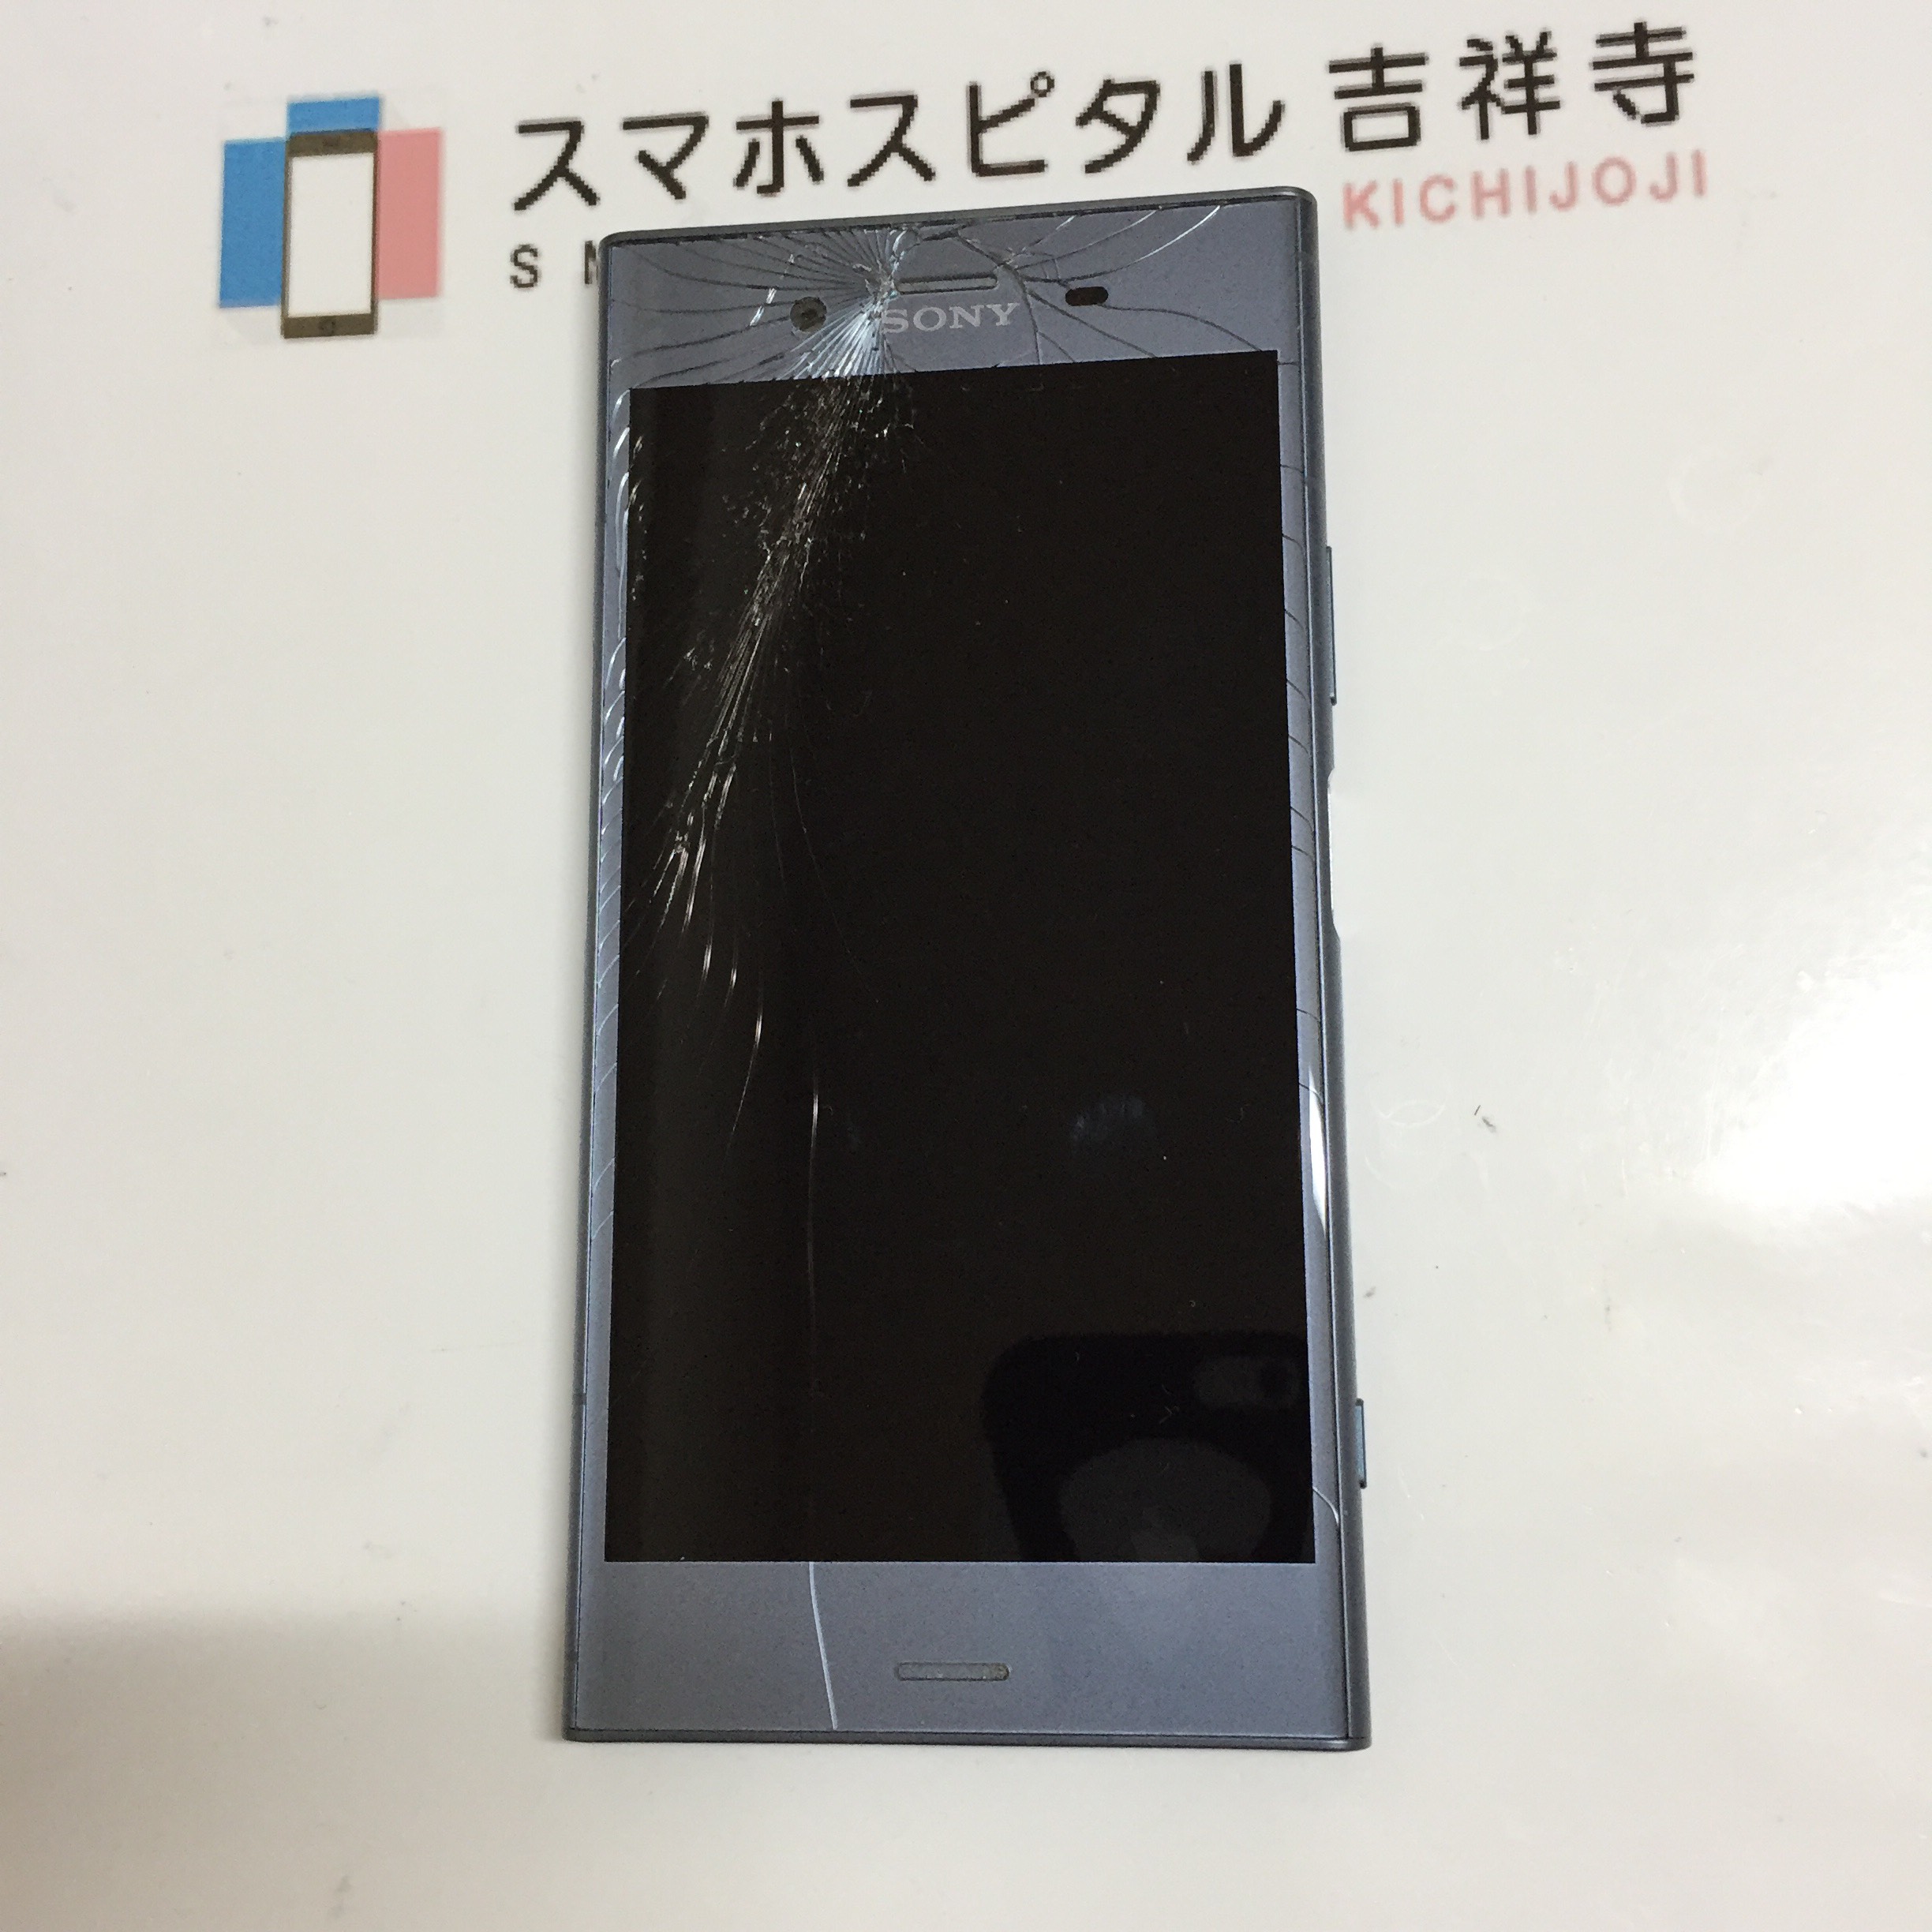 【Xperia XZ1(SO-01K、SOV36)】画面が割れてしまった交換修理 即日対応可能です！ #Android修理 #Xperia修理